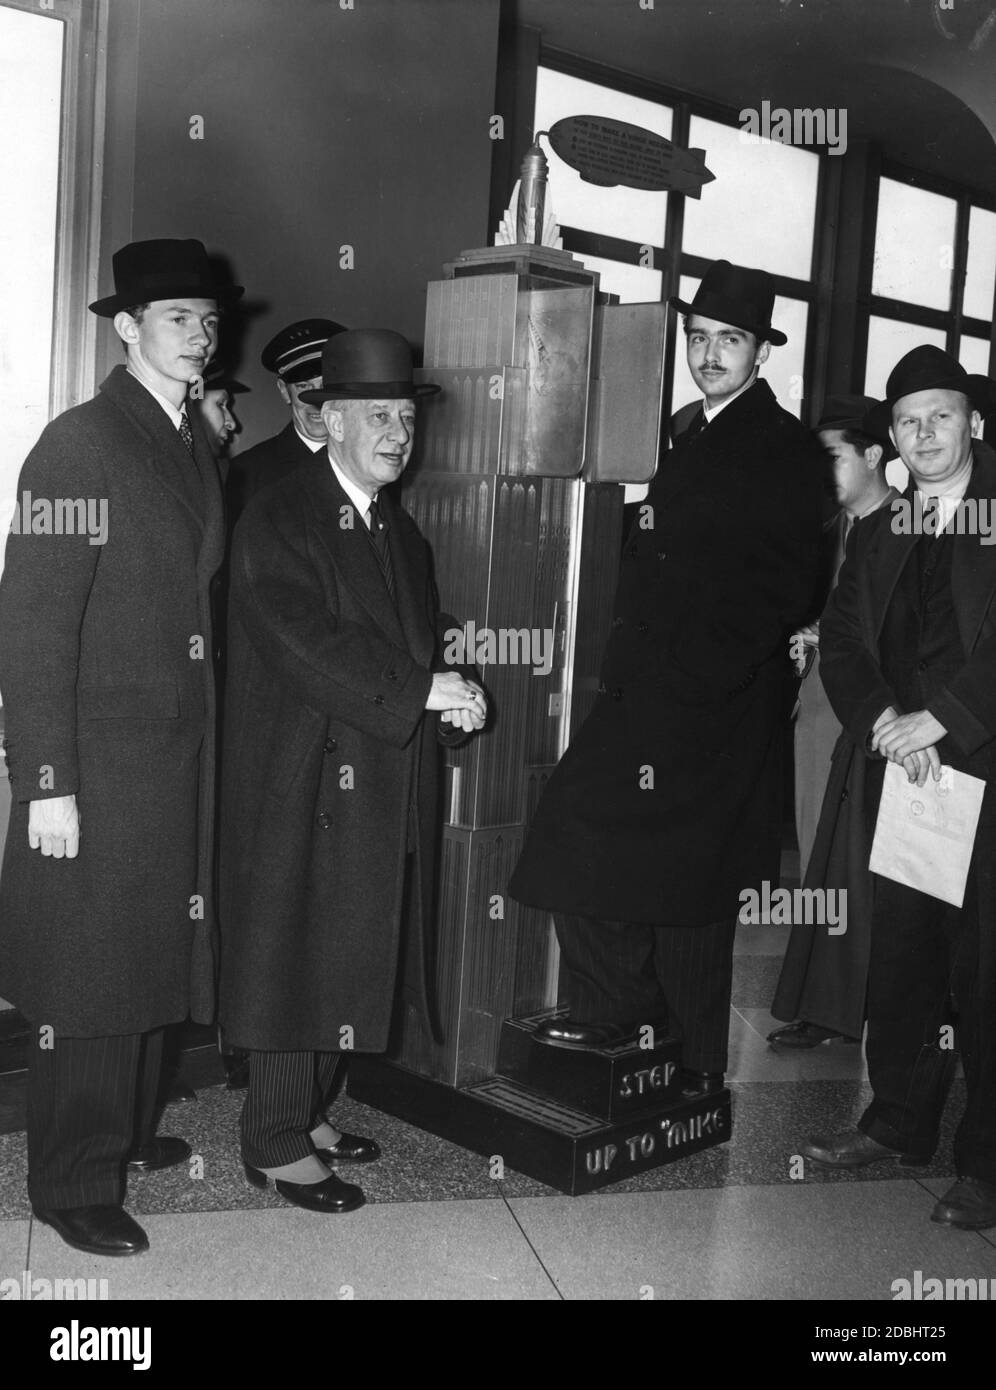 Felix von Habsburg, the former Governor of New York Alfred E. Smith and Otto von Habsburg (from left) during a visit to the Empire State Building in New York. Stock Photo